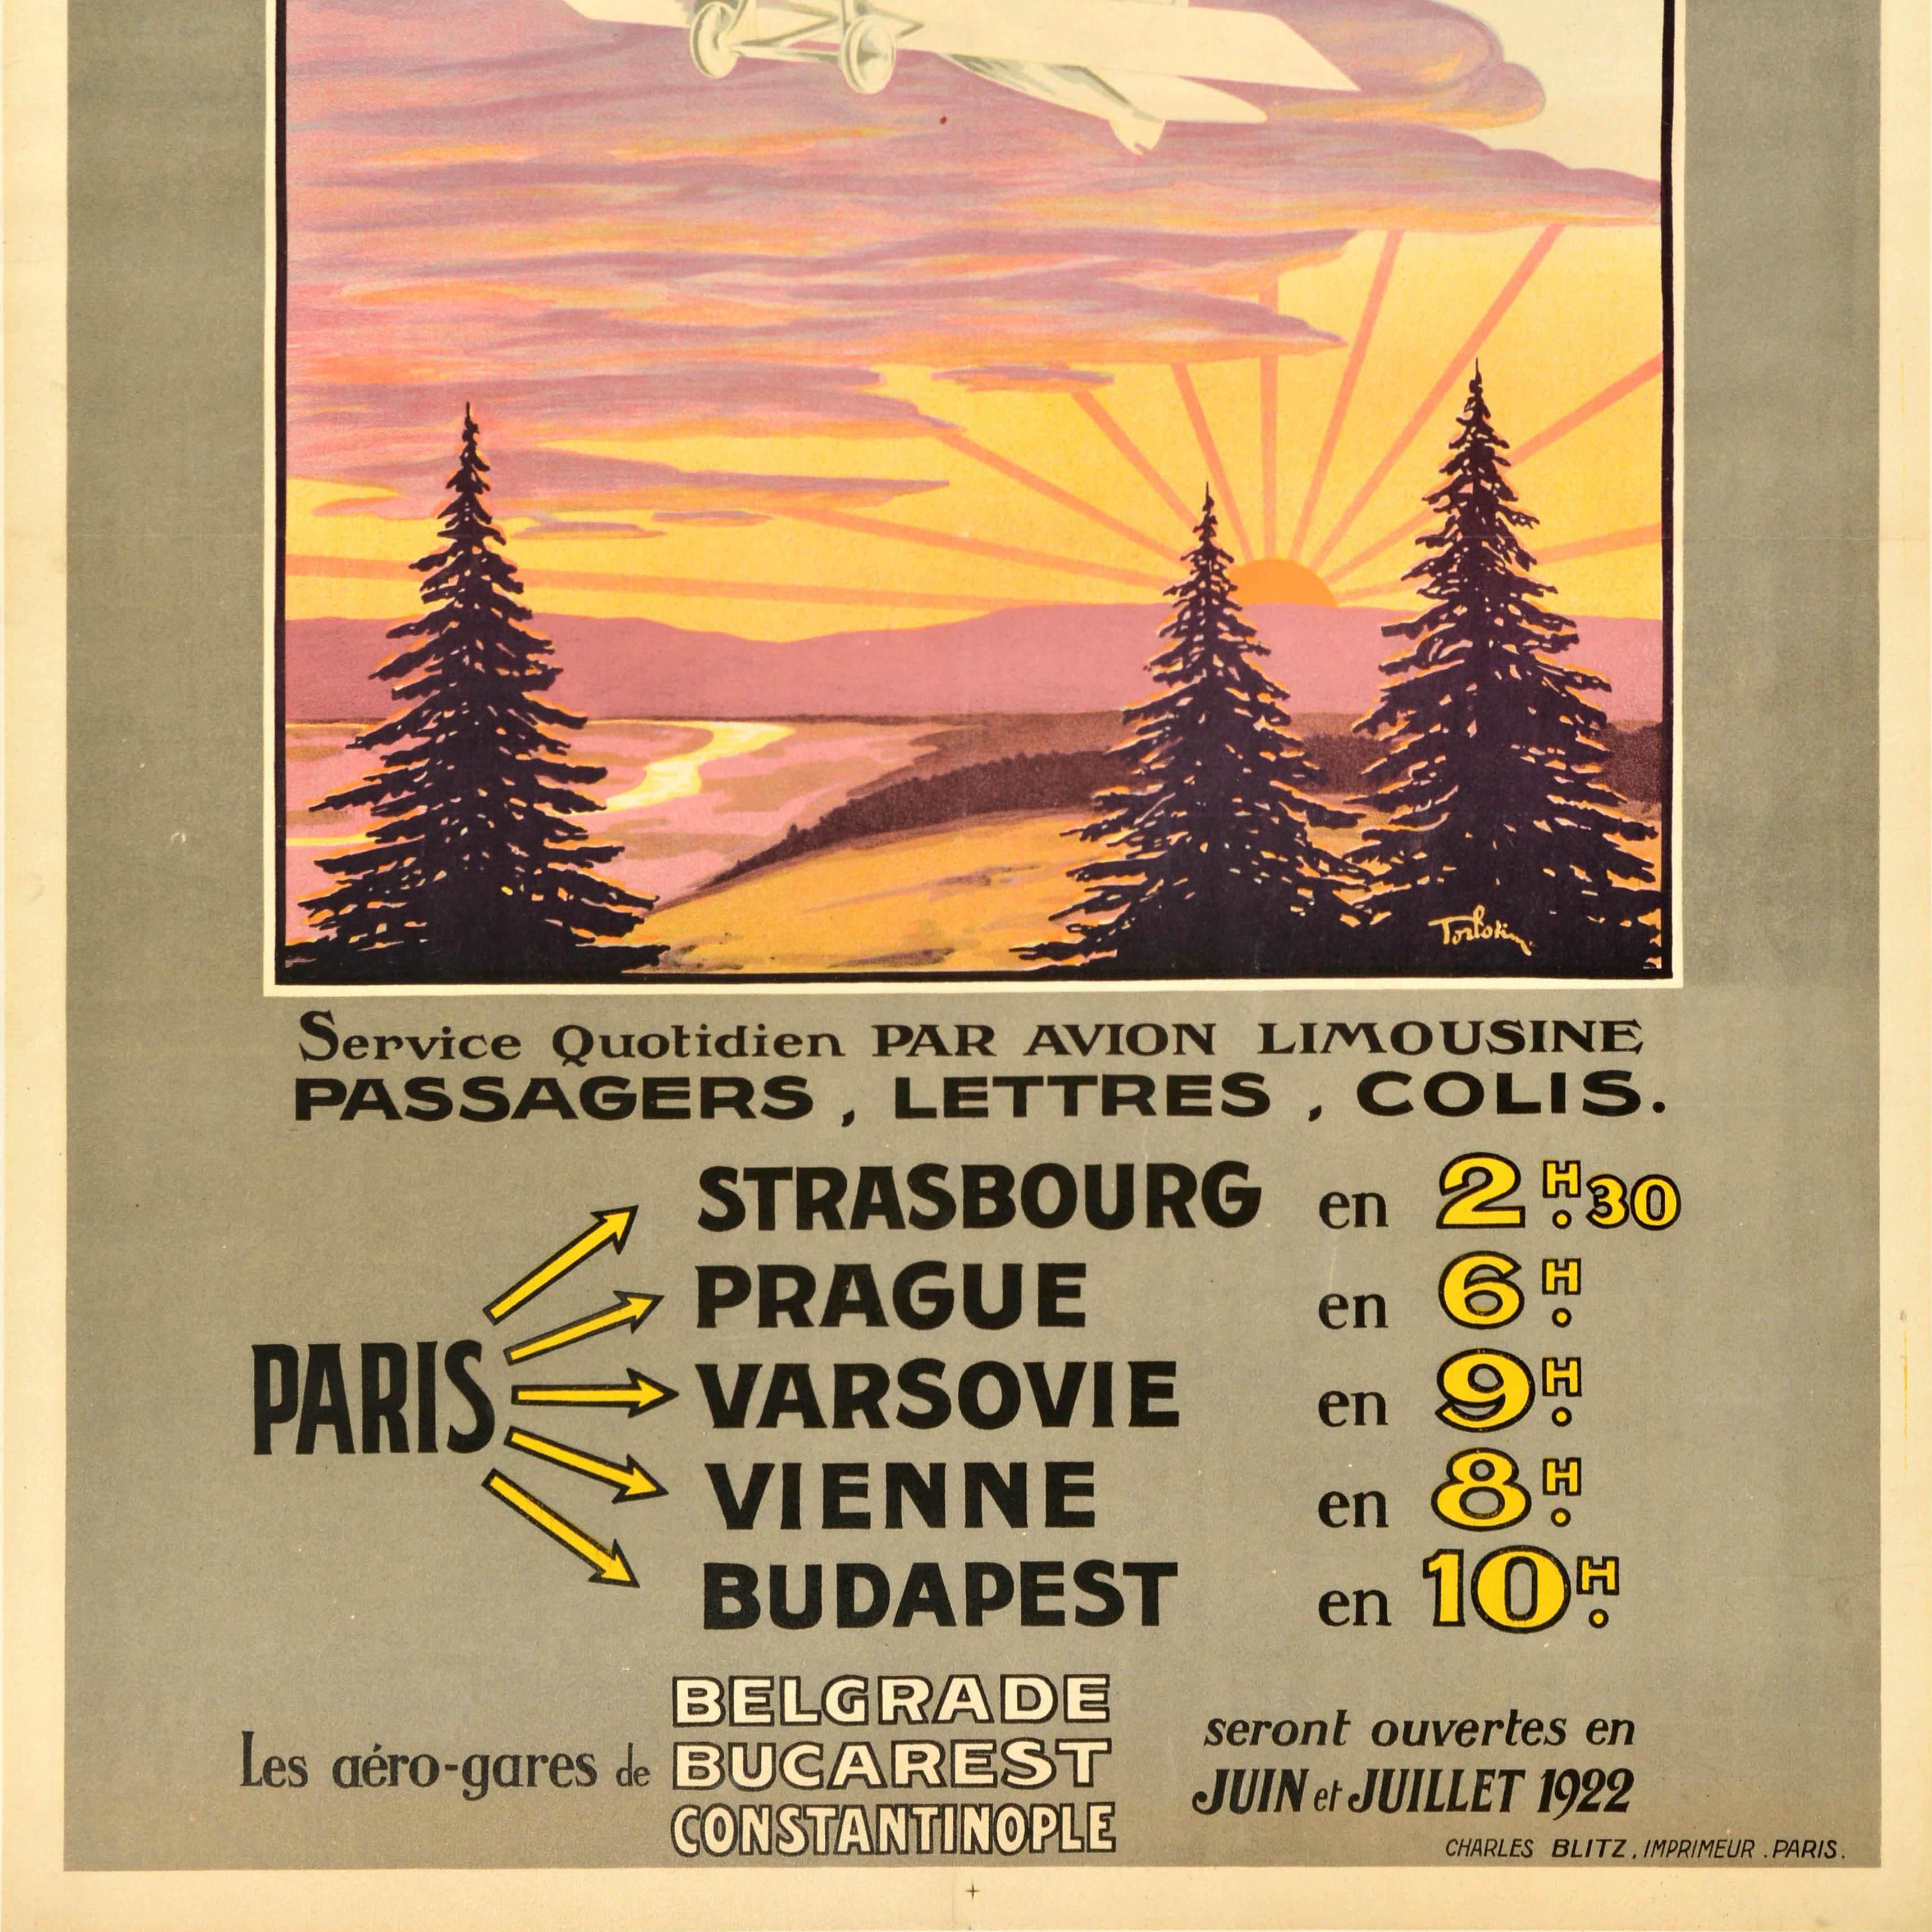 Original antique travel advertising poster for the Compagnie Franco Roumaine de Navigation Aerienne / French Romanian Company for Air Transport featuring great artwork of a plane flying above fir trees with a river in the countryside below and red